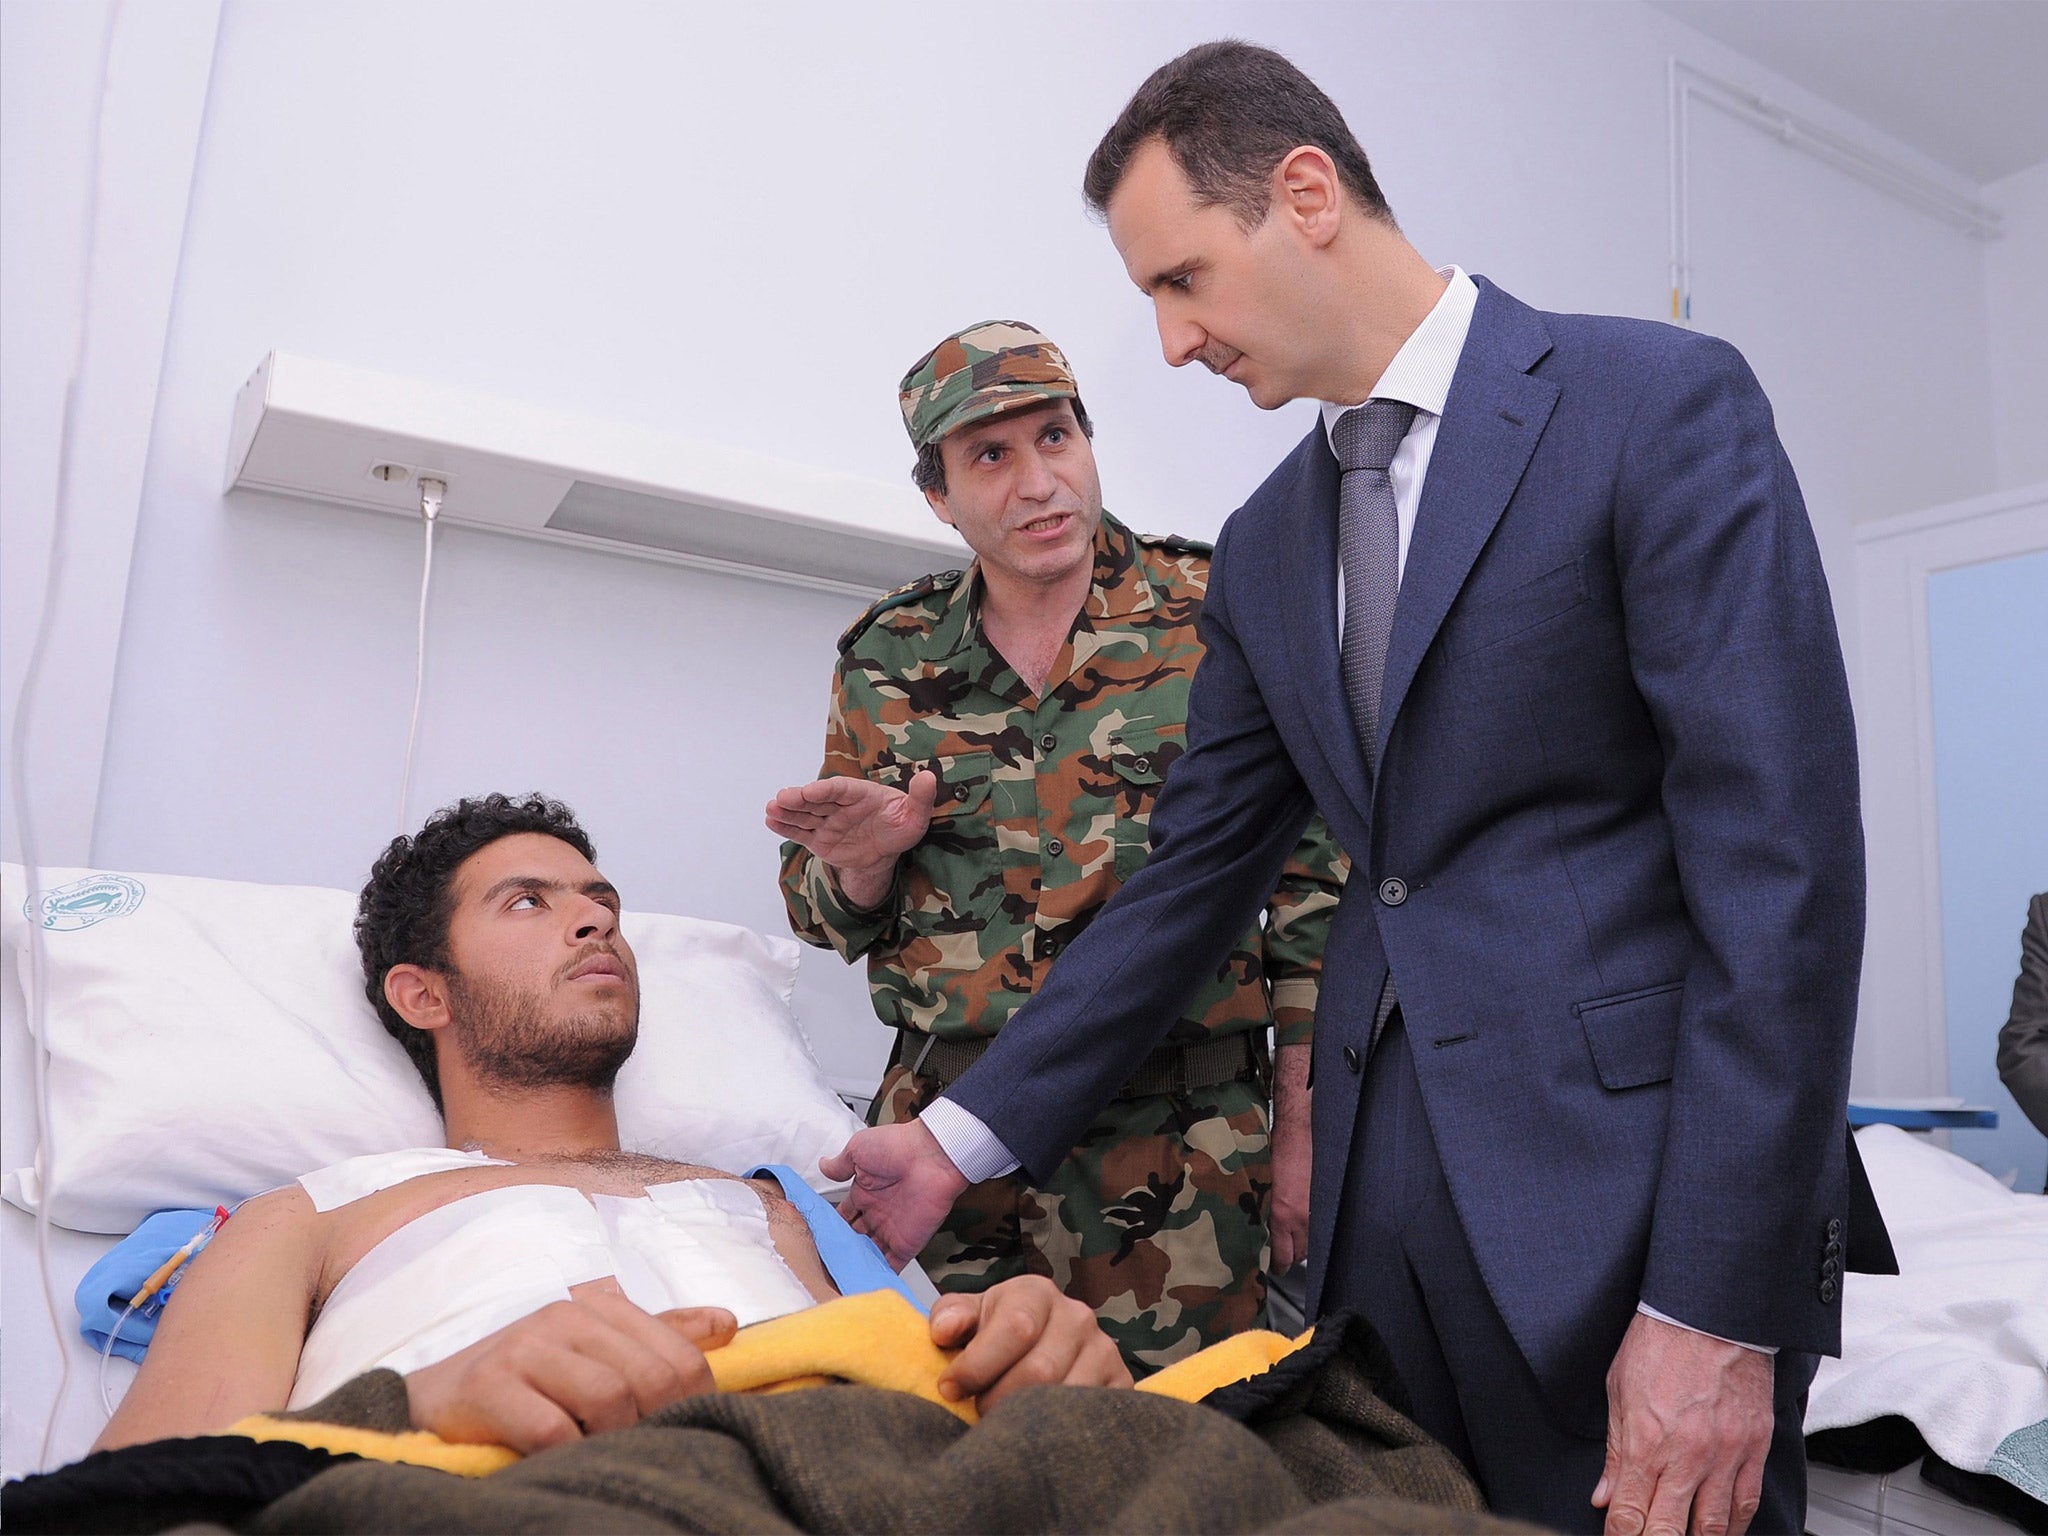 Syrian President Bashar Assad visits army and security soldiers wounded in the civil war at al-Youssef al-Azmah Hospital in Damascus